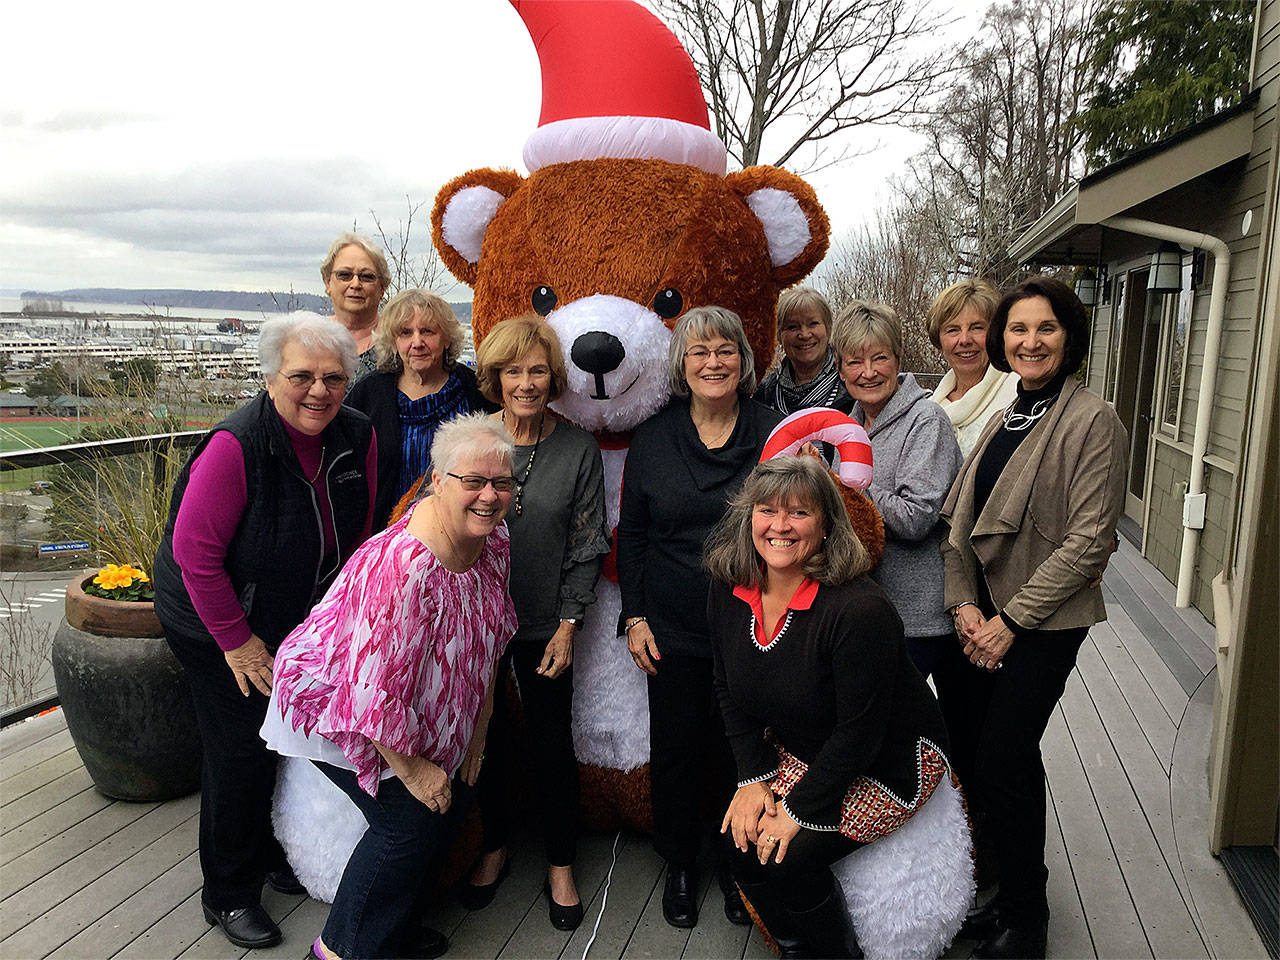 Providence General Children’s Association’s Teddy Bear Breakfast is Dec. 7 at the Tulalip Resort this year. (Providence General Children’s Association)                                Members of the Providence General Children’s Association Teddy Bear Breakfast Committee. (Contributed photo)